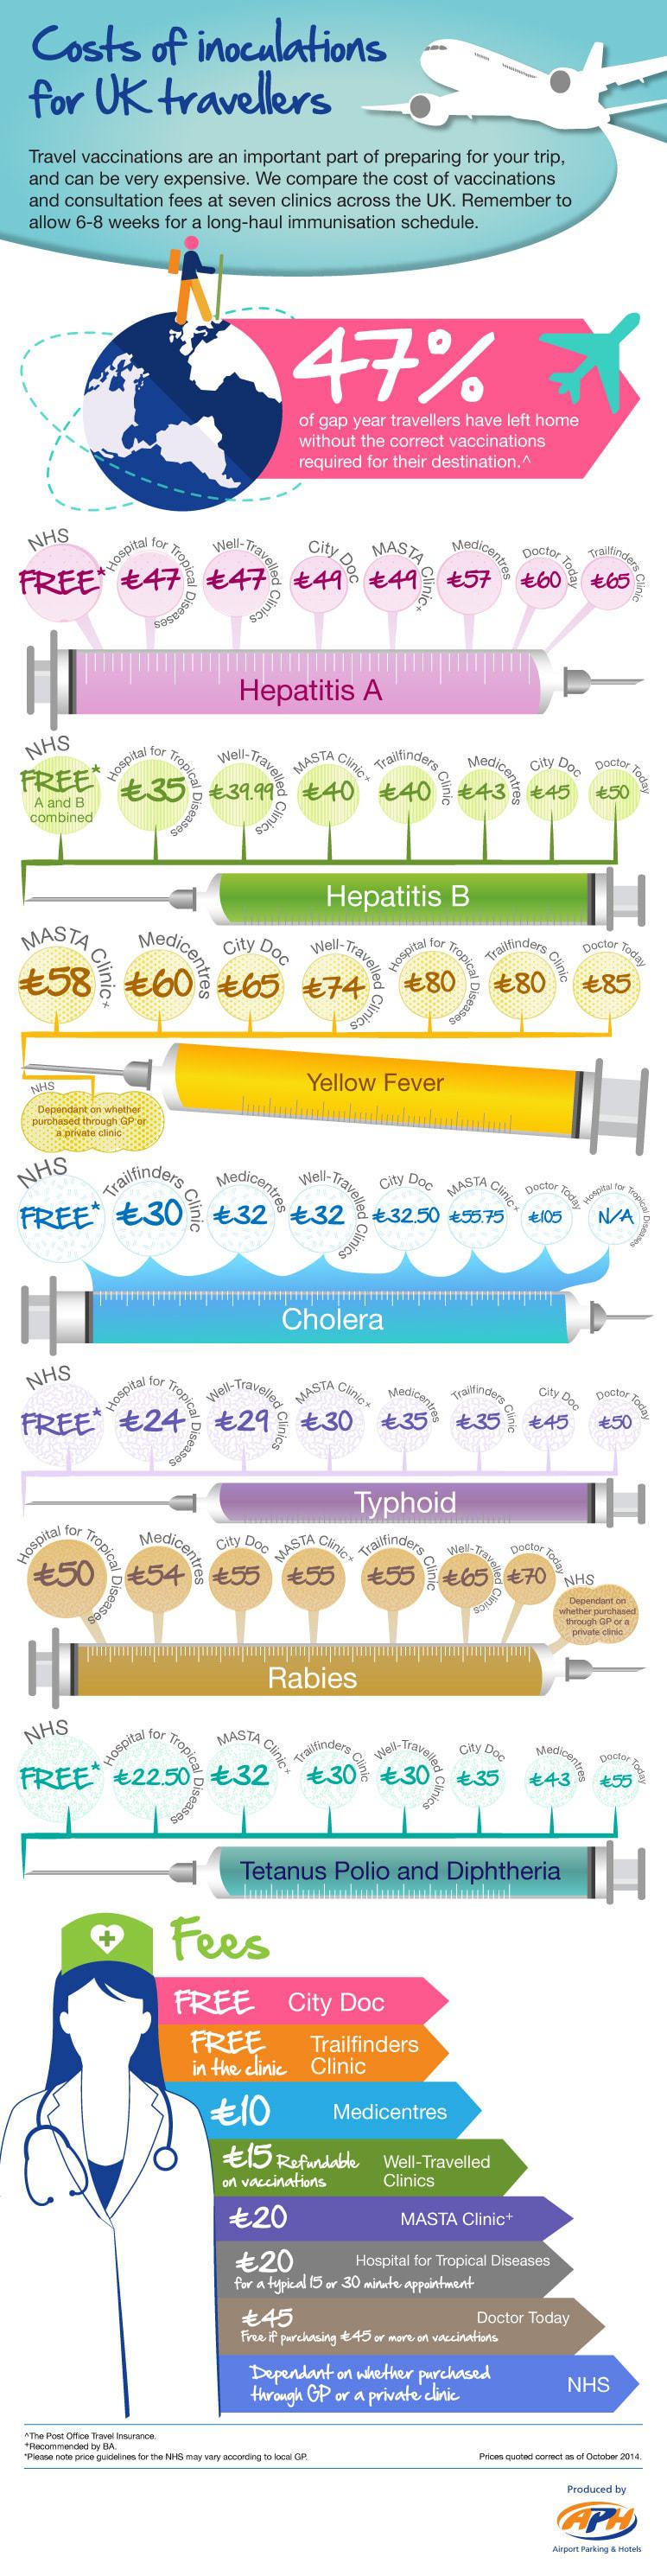 Inoculation-costs-infographic-aph